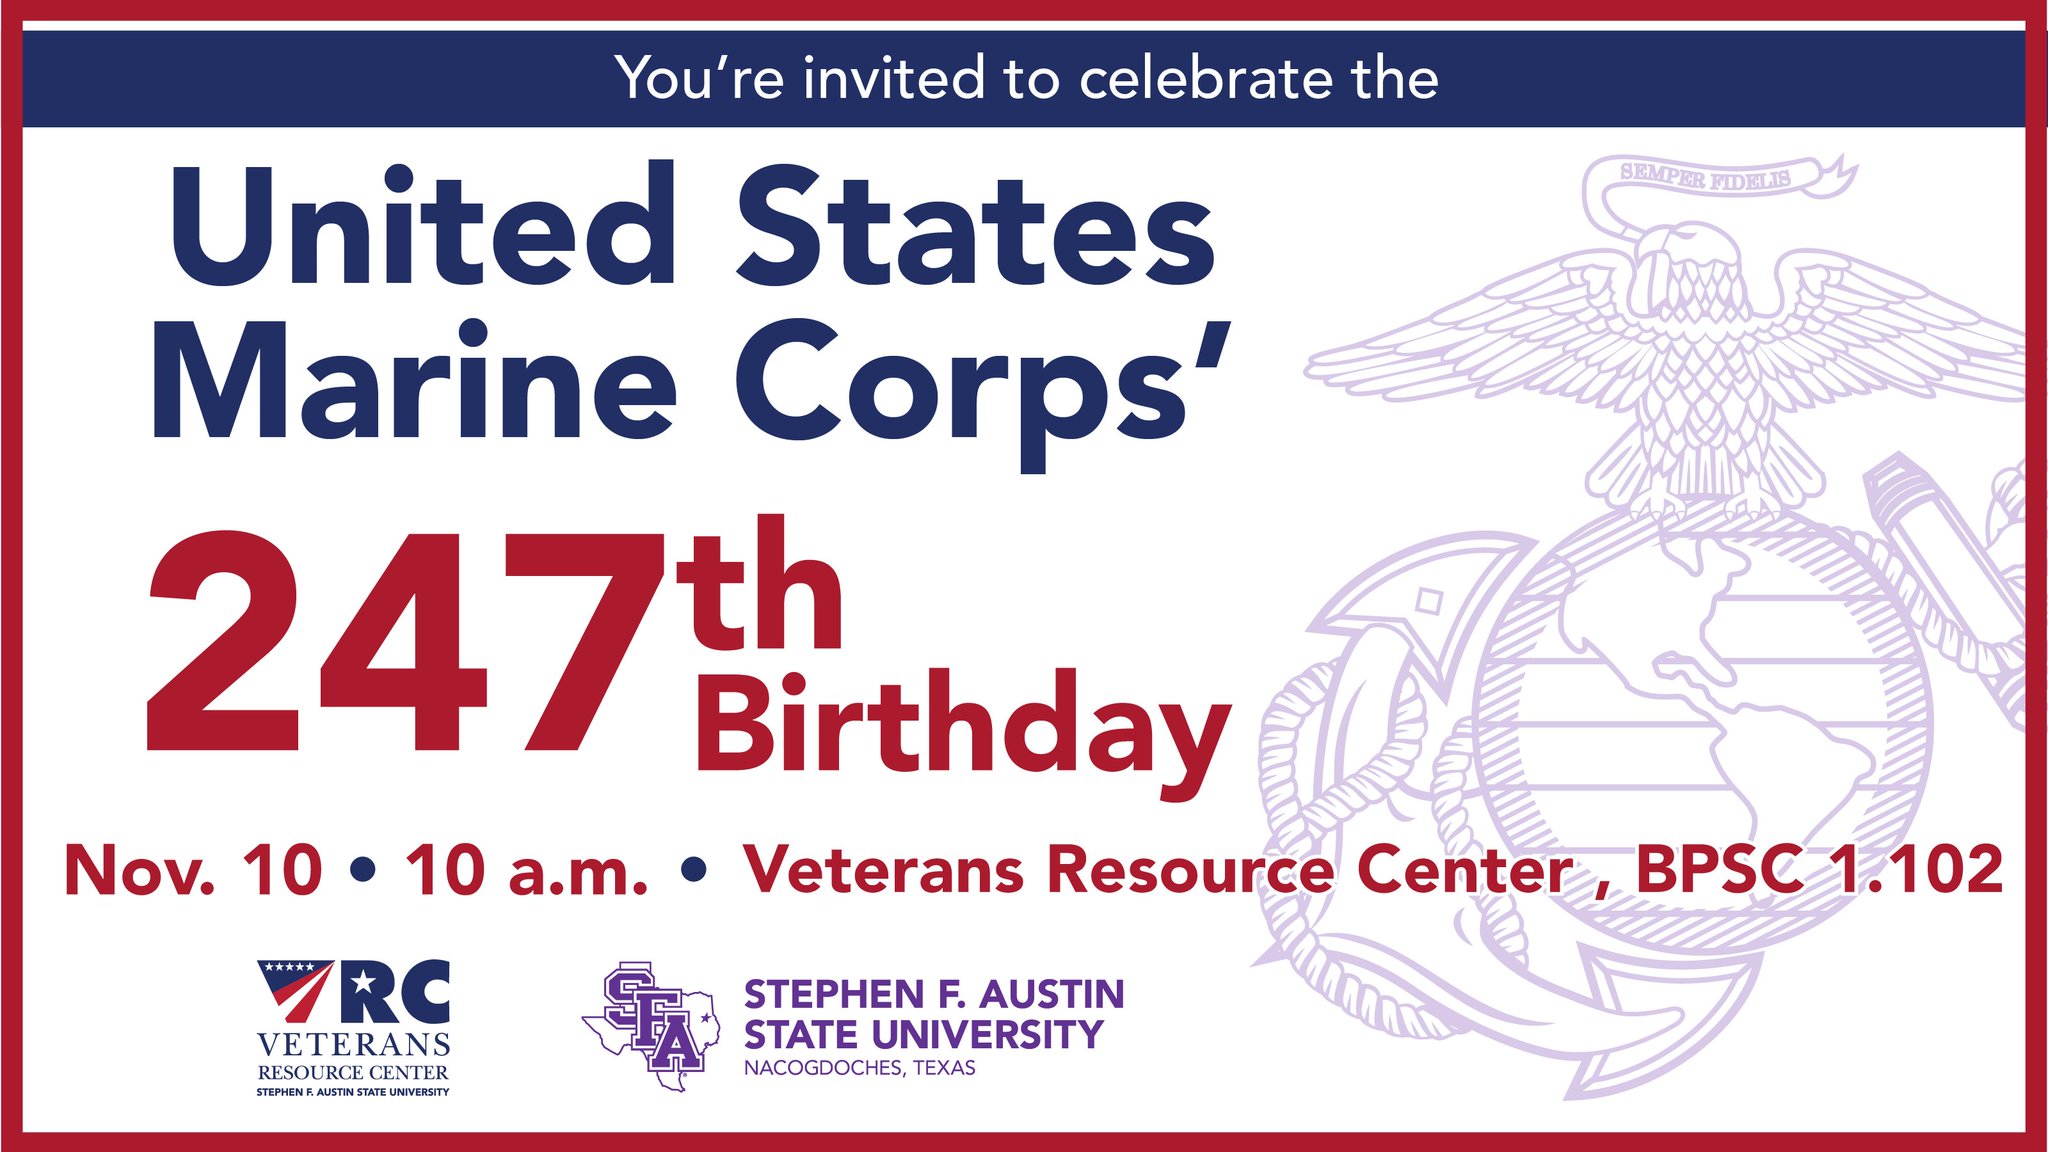 Stephen F. Austin State University on Twitter: "You're invited to celebrate the United States Marine Corps' 247th birthday at 10 a.m. Nov. 10 in SFA's Veterans Resource Center. Attendees can watch a birthday message from the Marine Commandant and ...